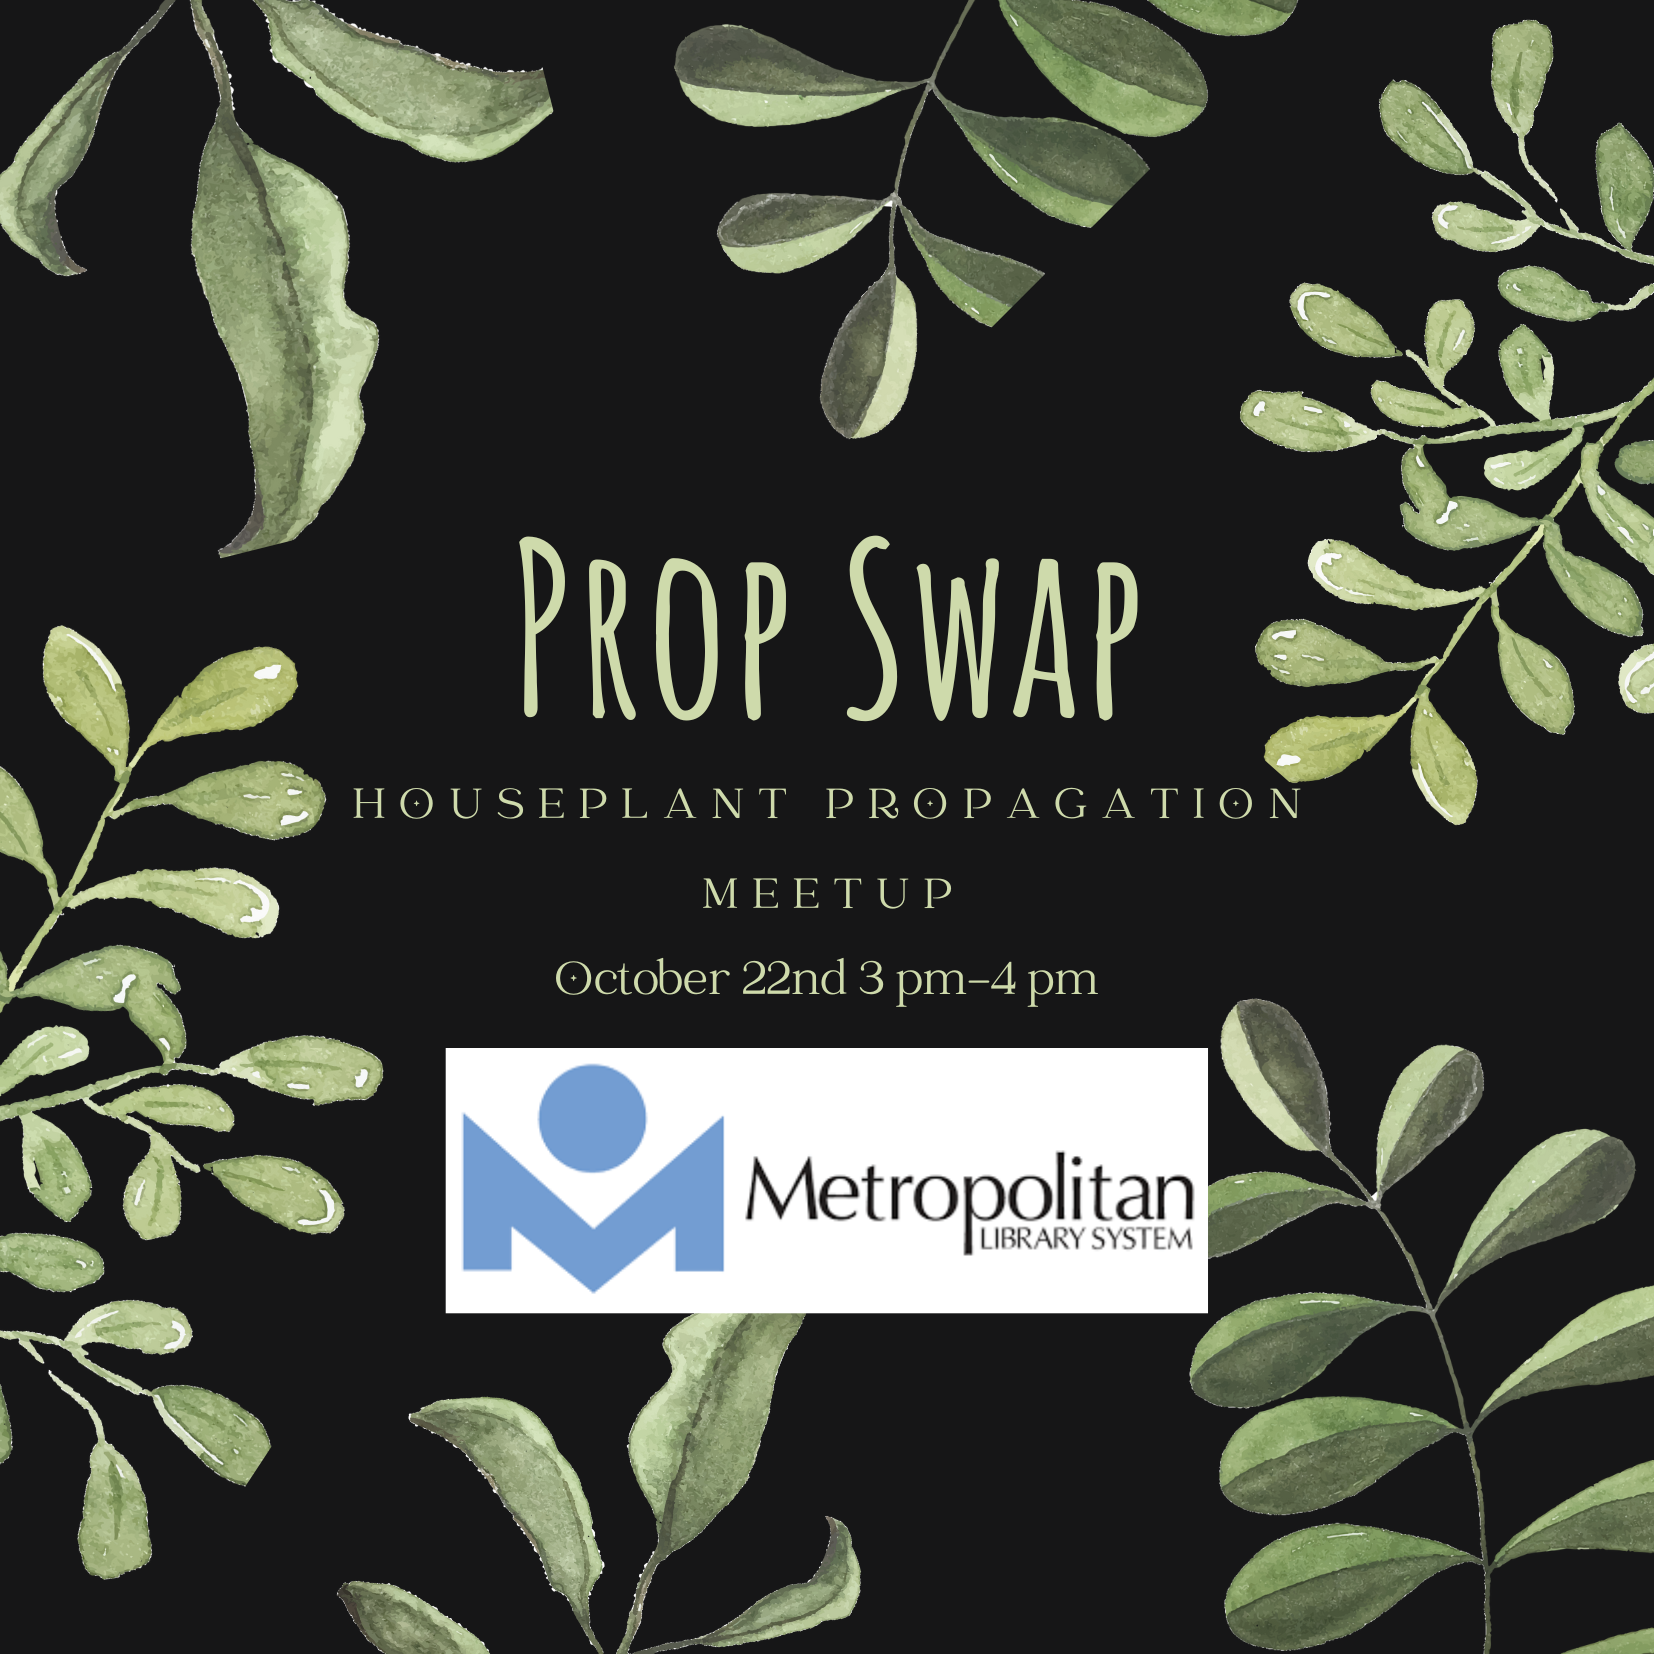 Green plants on a black background. Text reads " Prop Swap Houseplant Propagation Meetup October 22nd 3 to 4 pm" Followed by metrolibrary logo